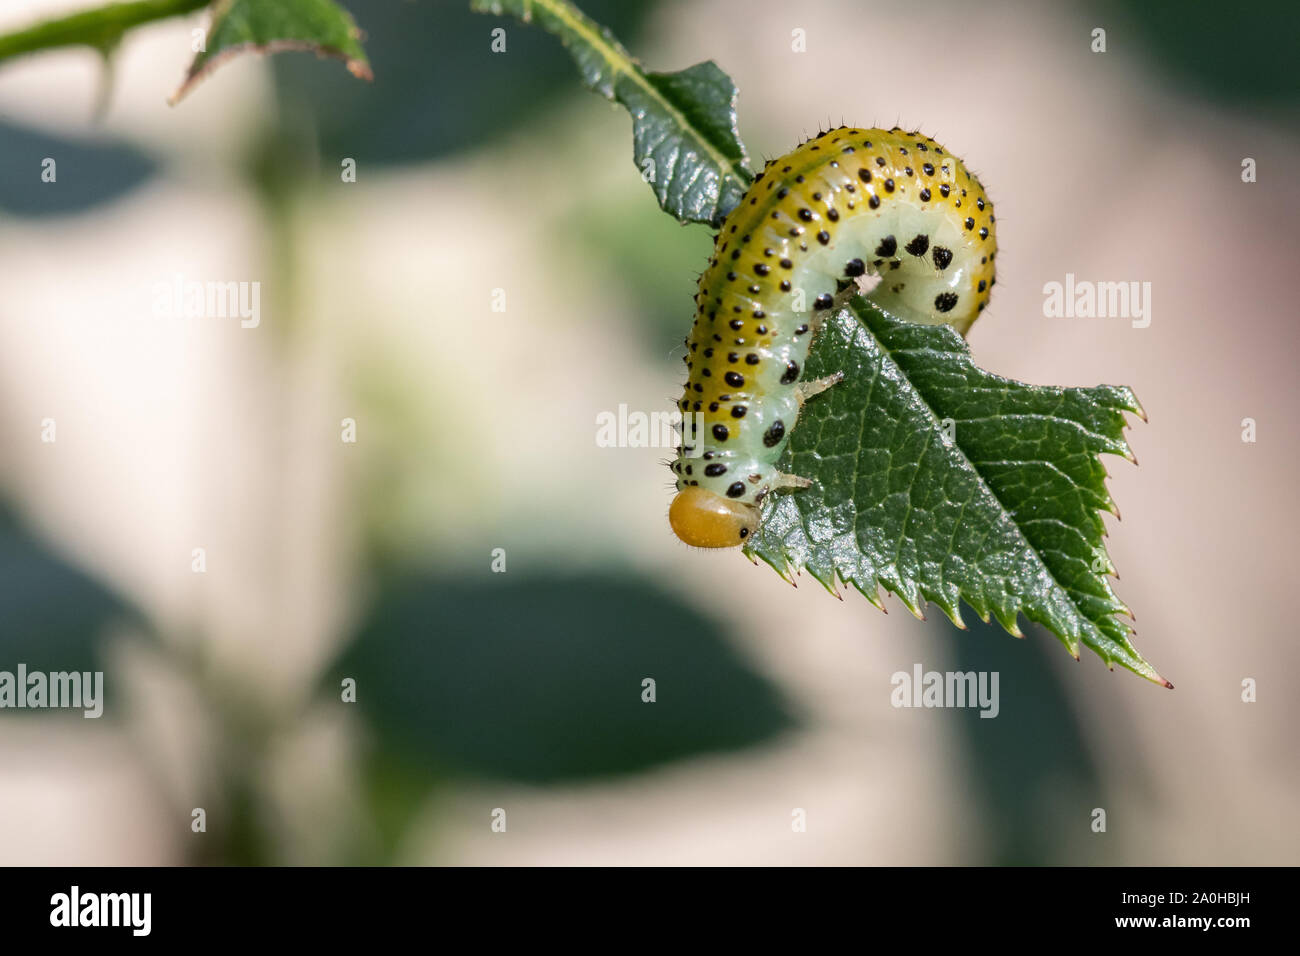 Caterpillar of the Rosewood Sawfly (Arge rosae) on a rose leaf Stock Photo